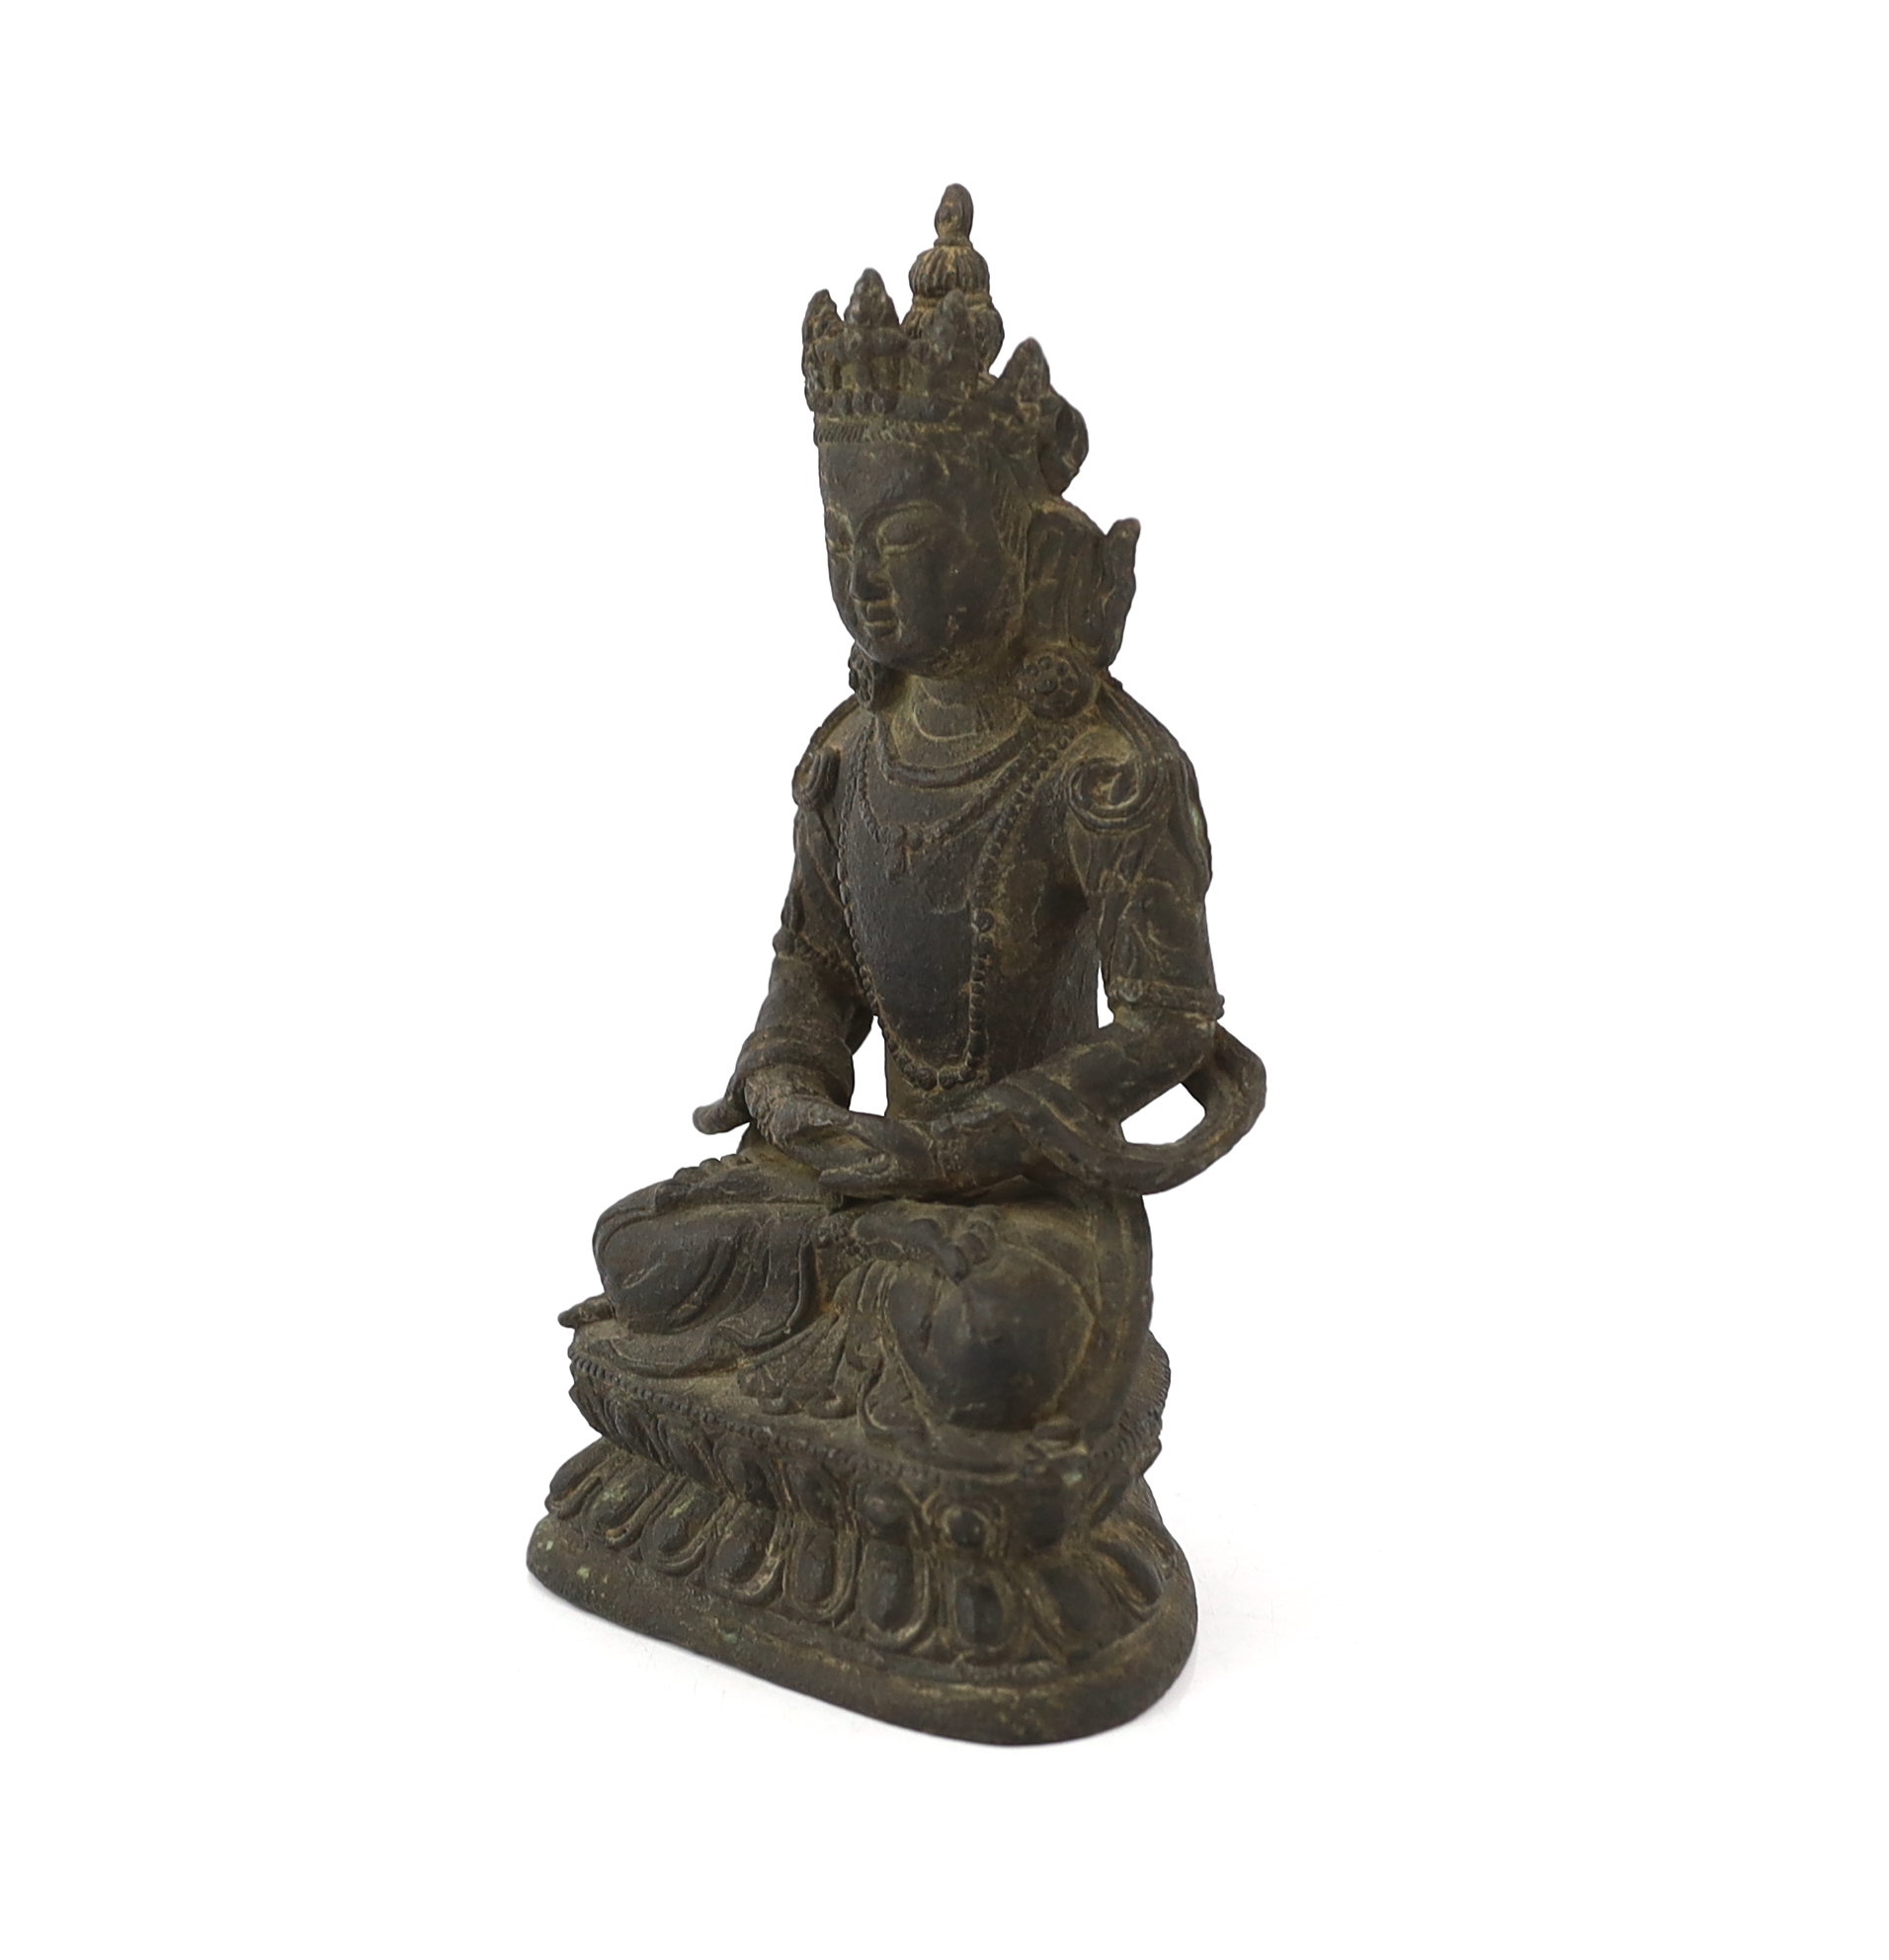 A Chinese bronze seated figure of Amitayus, probably 18th century, surface pitted